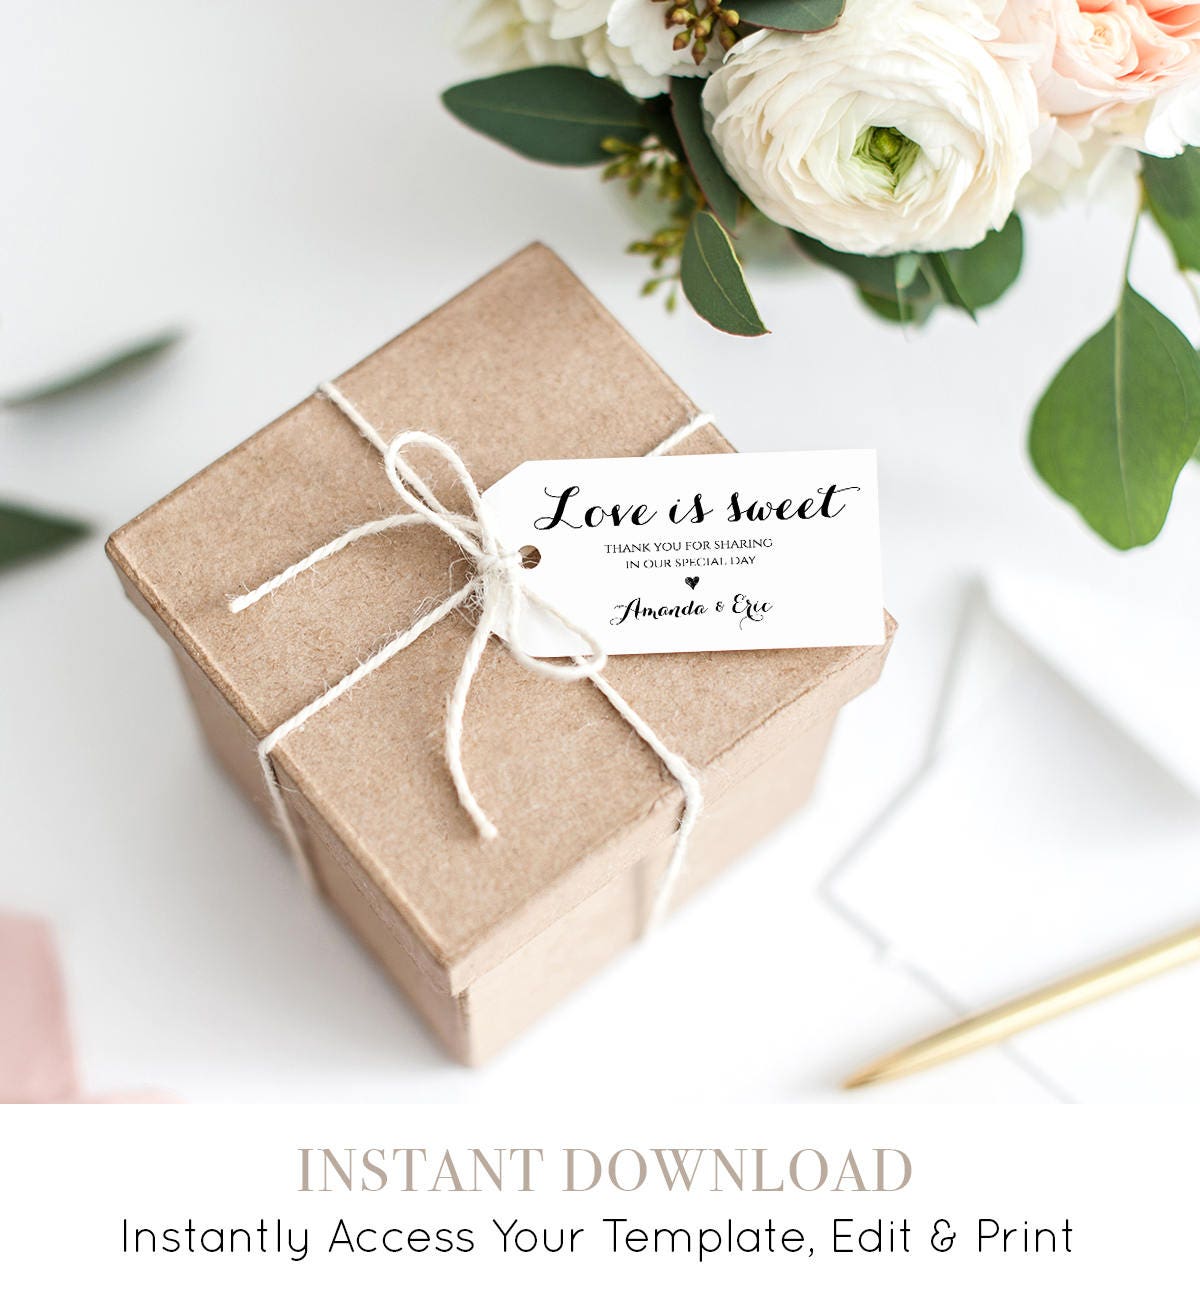 100 SMALL Personalized Favor Tag LOVE is SWEET